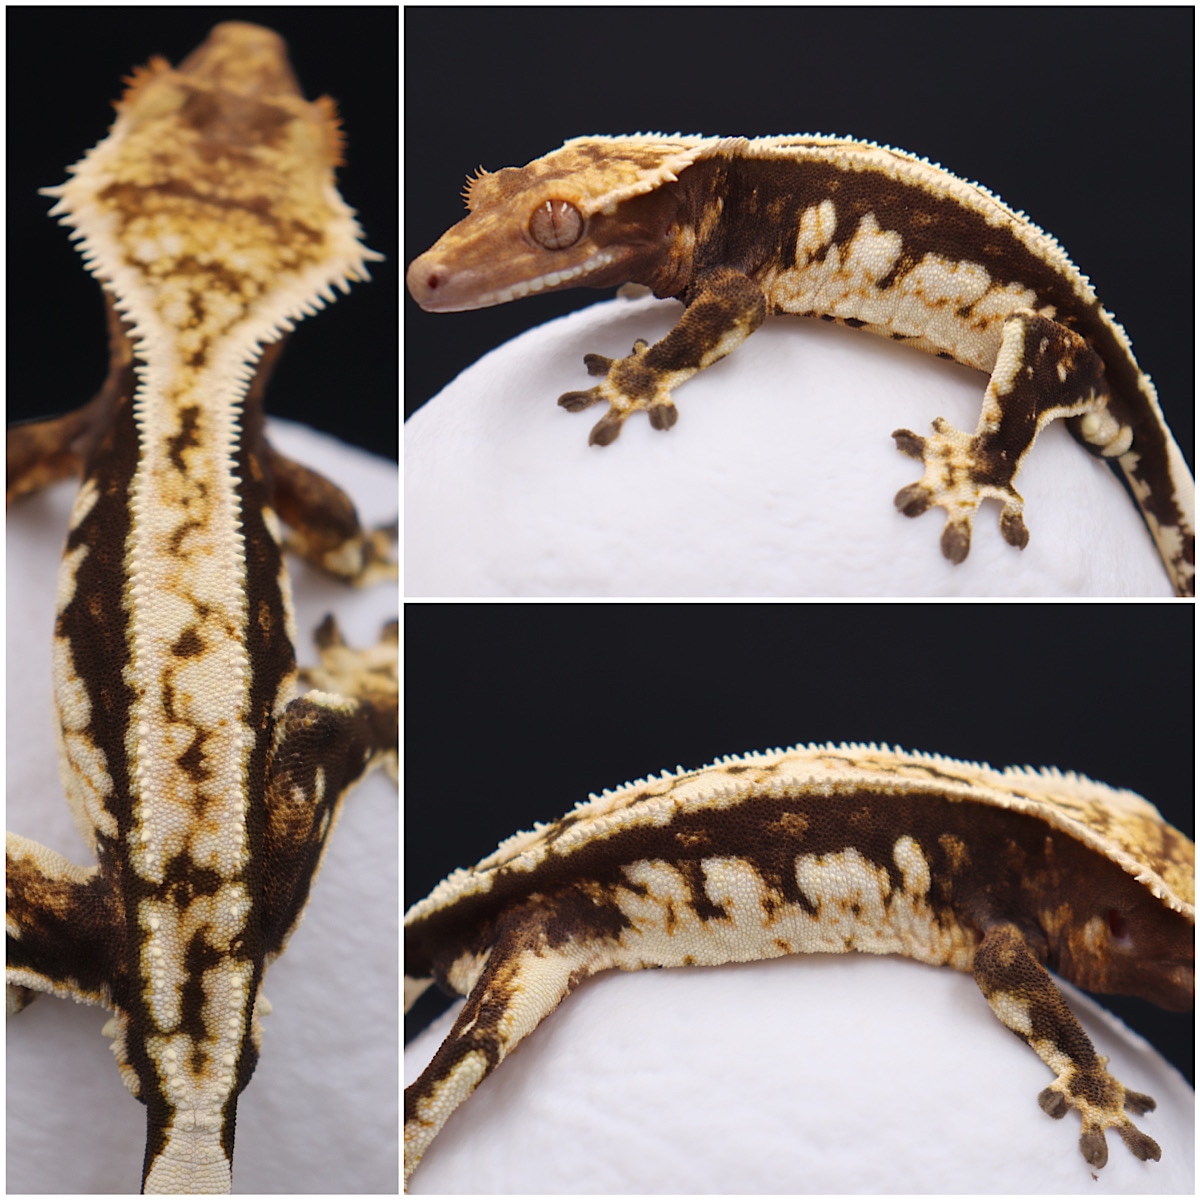 Paper White Harlequin Crested Gecko by Roaring Rhacs